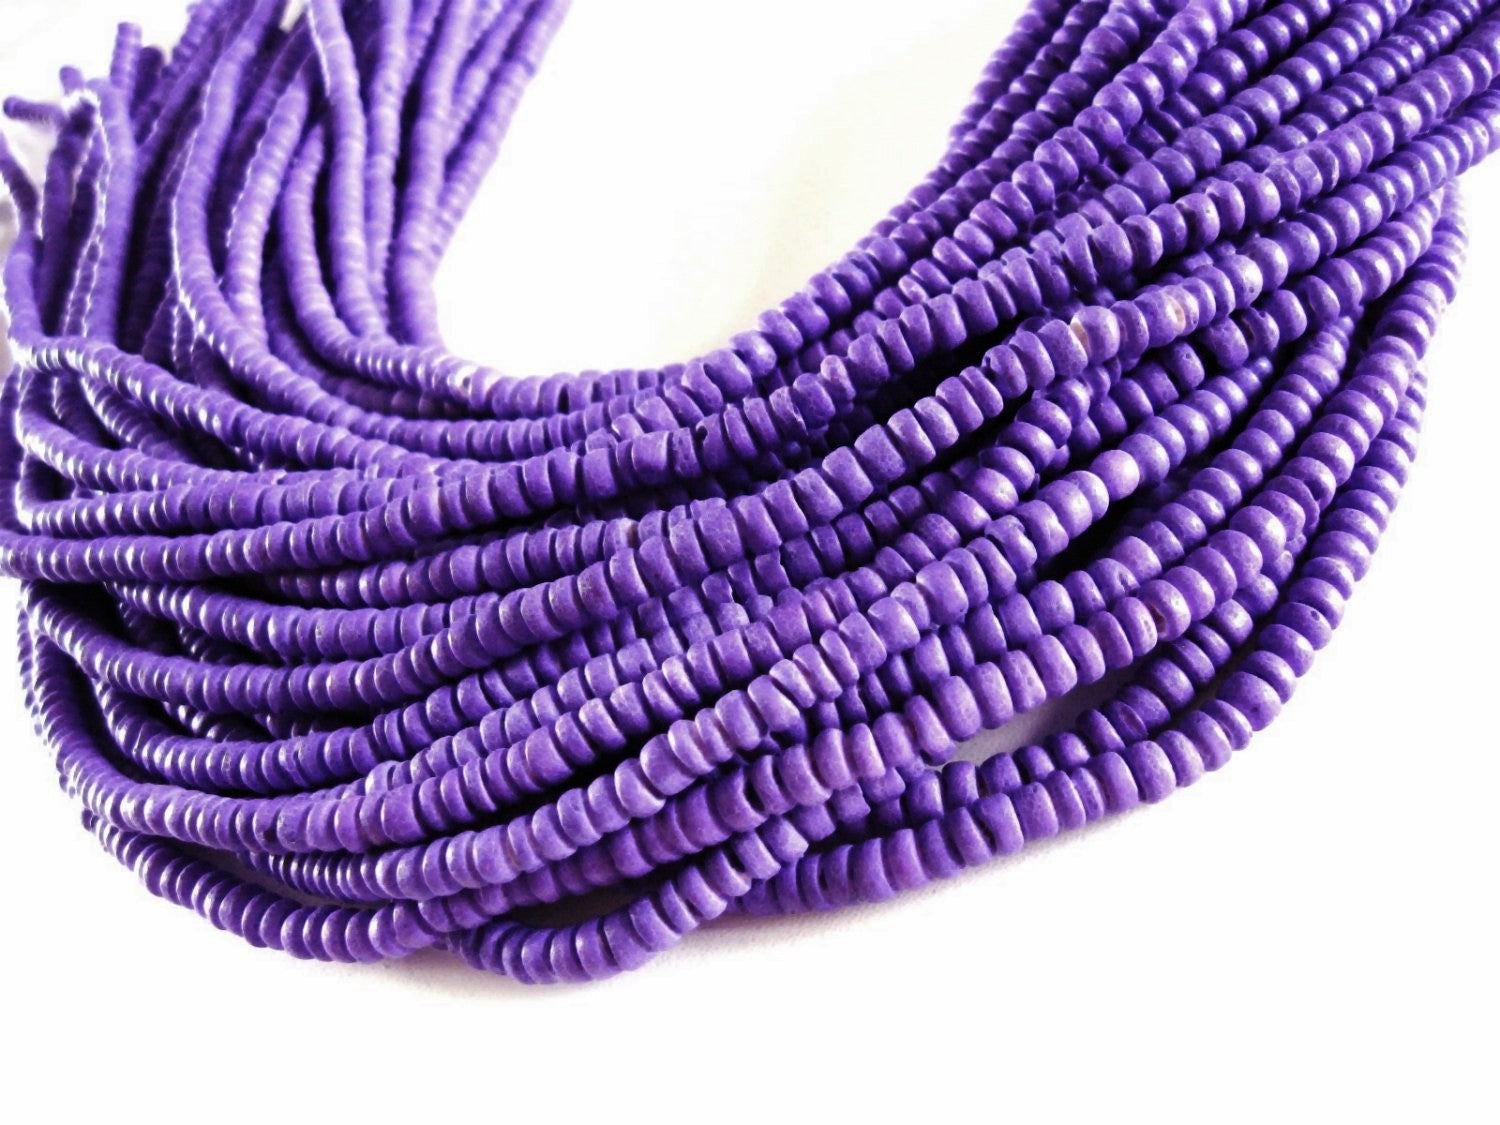 Coconut bead 150 purple wood Beads - Coconut Rondelle Disk Beads 4-5mm